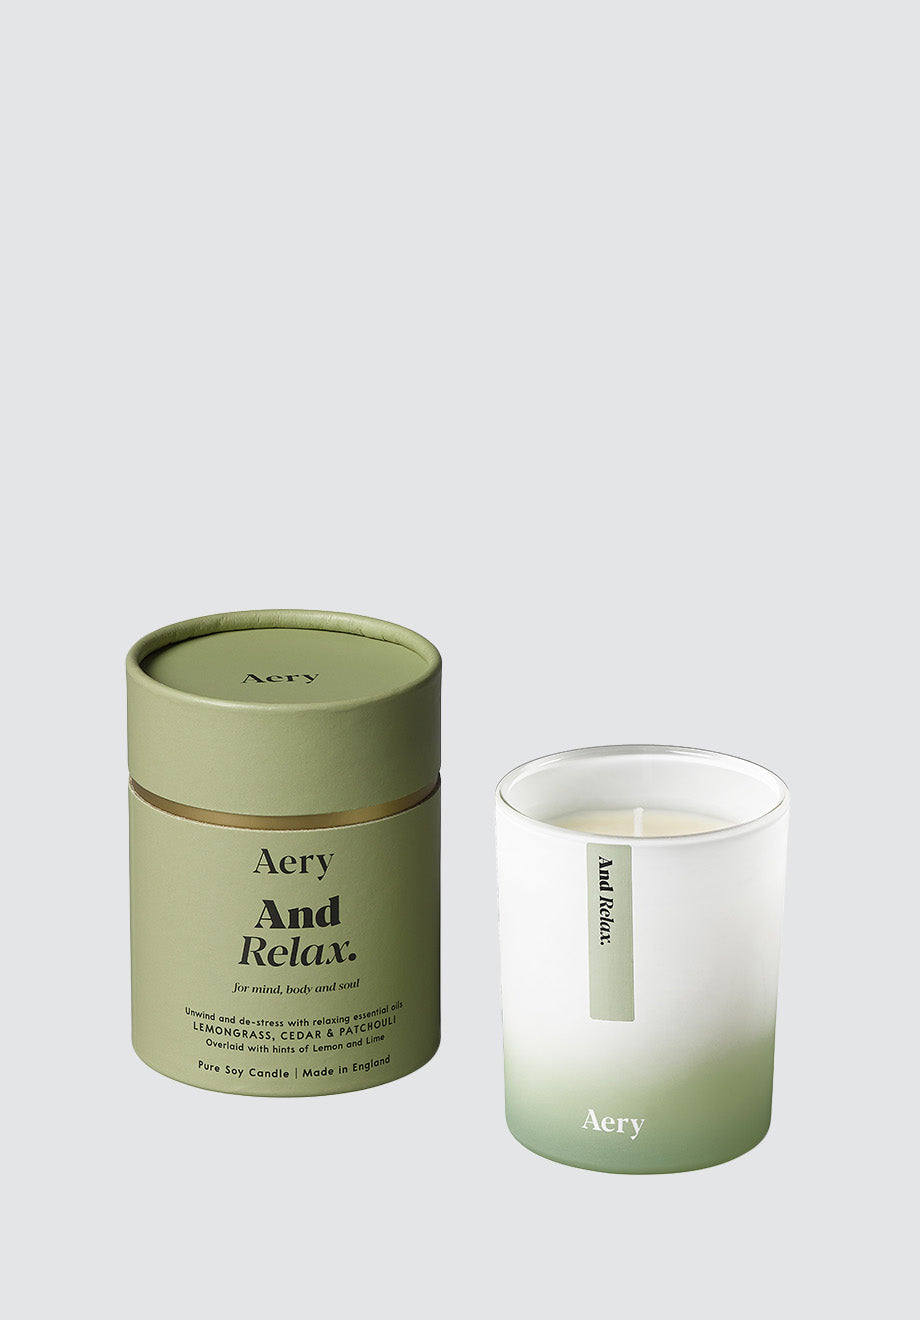 And Relax Scented Candle | Lemongrass Cedar & Patchouli